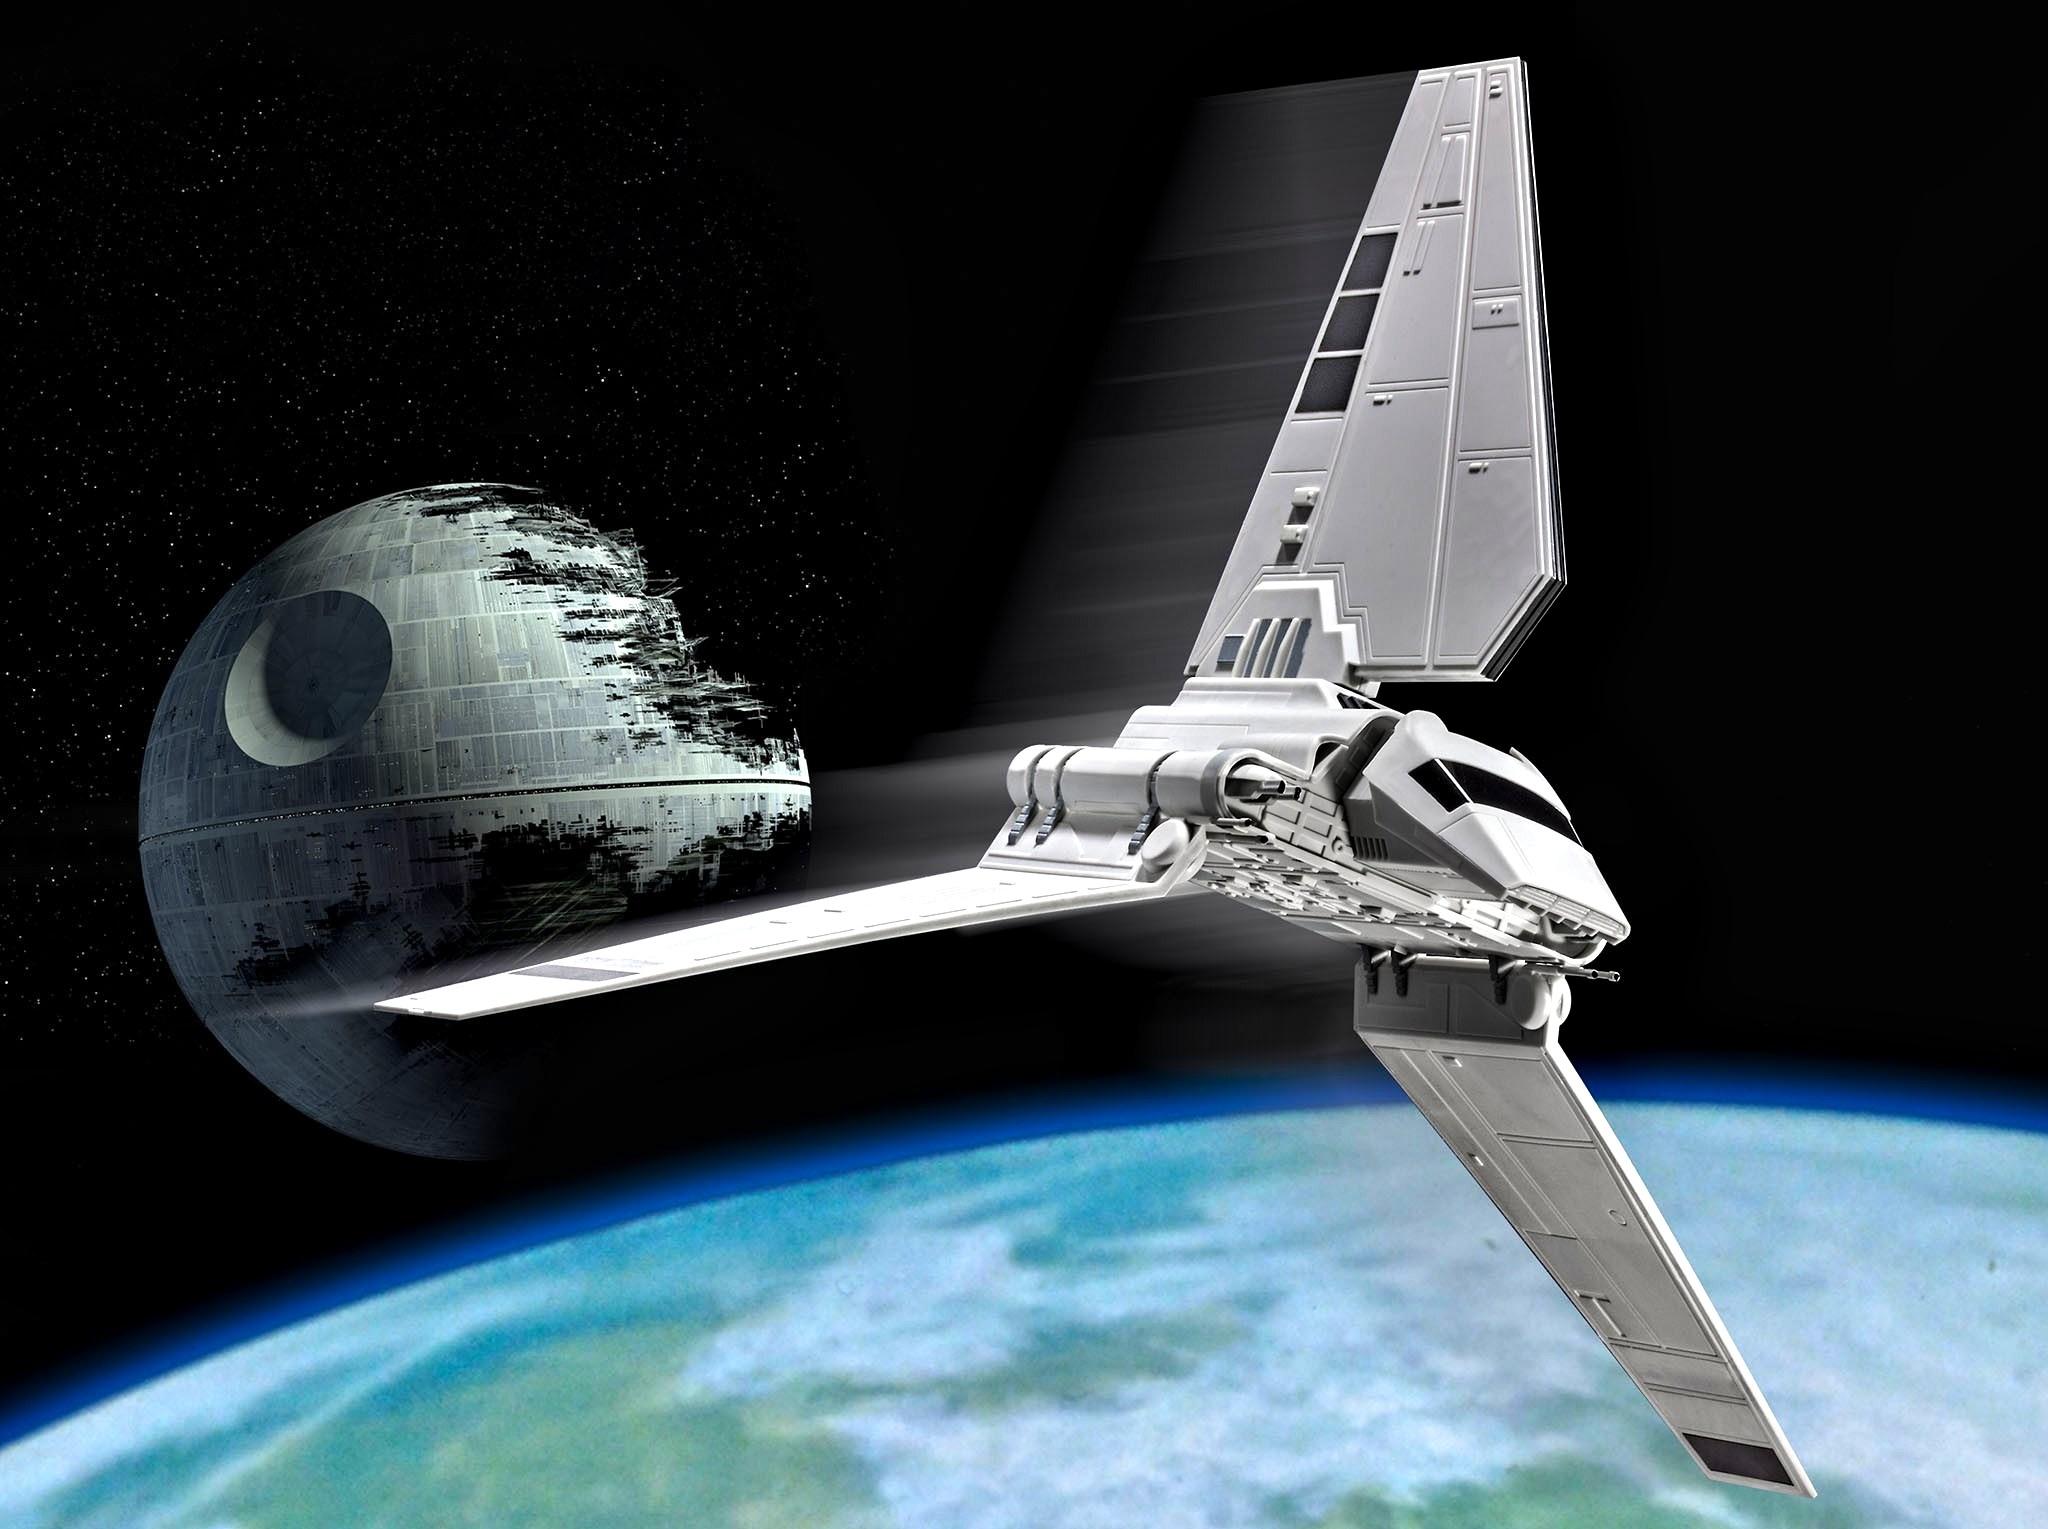 Lambda Class T 4a Shuttle Also Know As Imperial